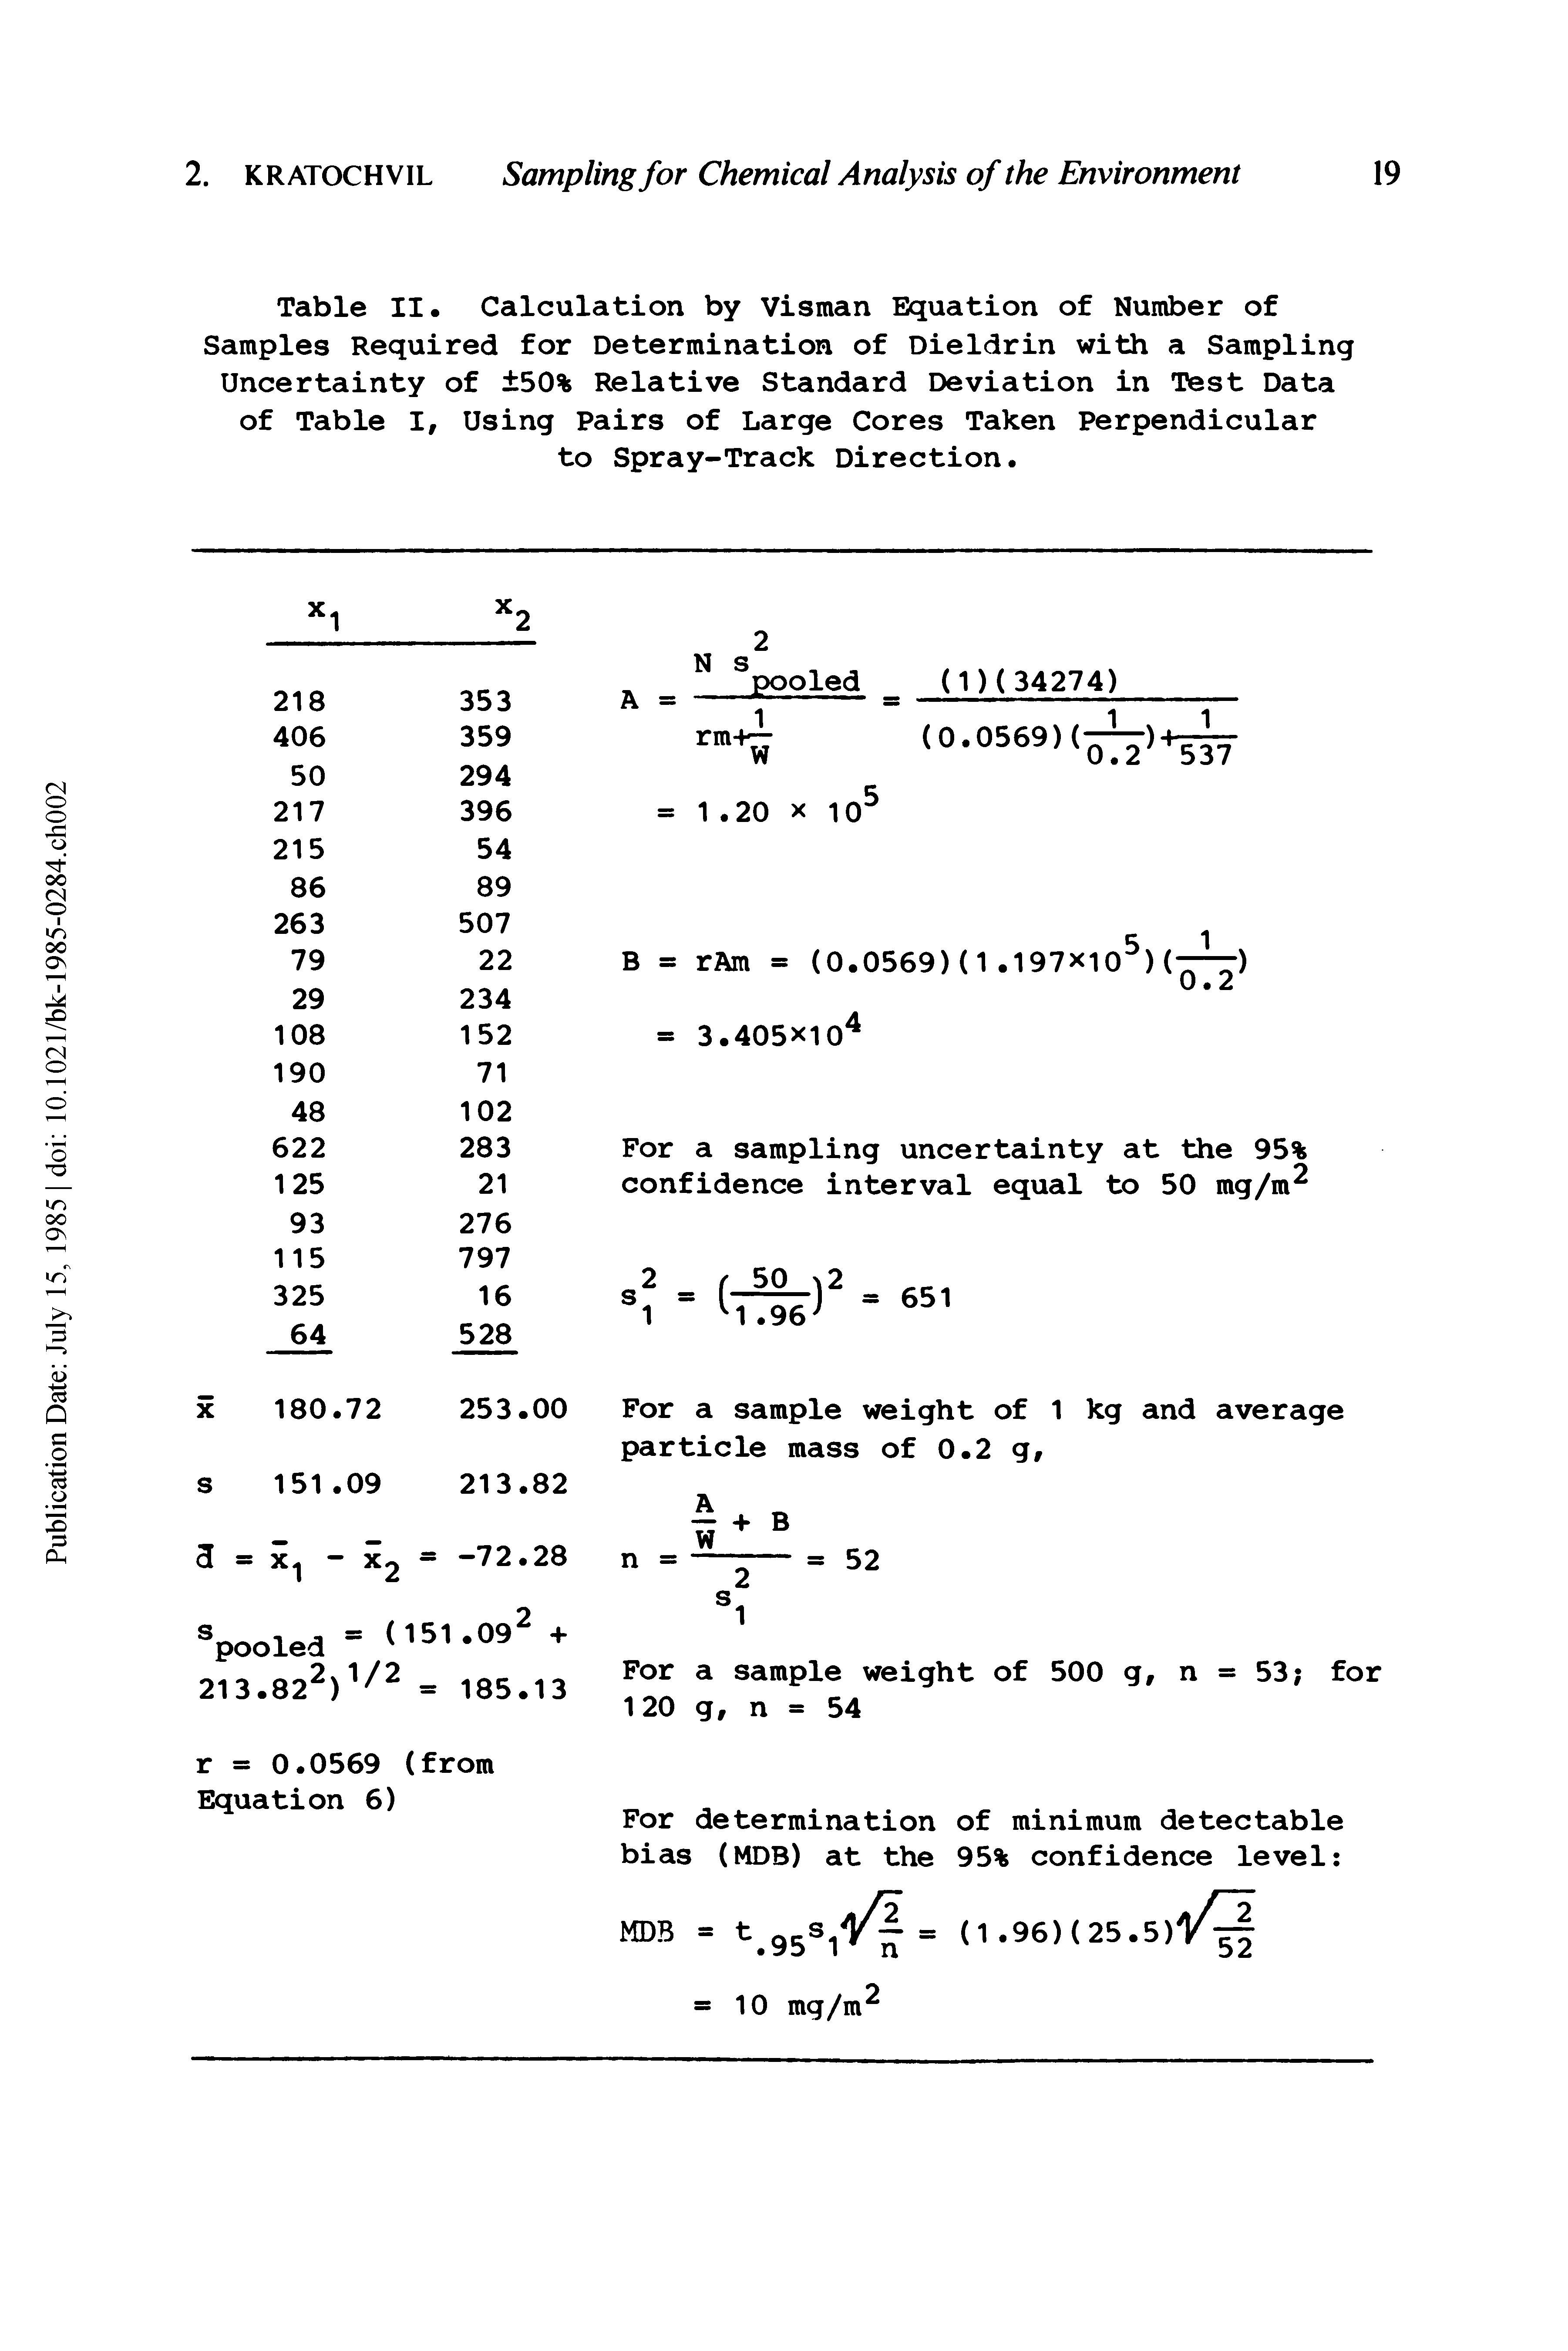 Table II Calculation by Visman Equation of Number of Samples Required for Determination of Dieldrin with a Sampling Uncertainty of 50% Relative Standard Deviation in Test Data of Table I, Using Pairs of Large Cores Taken Perpendicular to Spray-Track Direction.